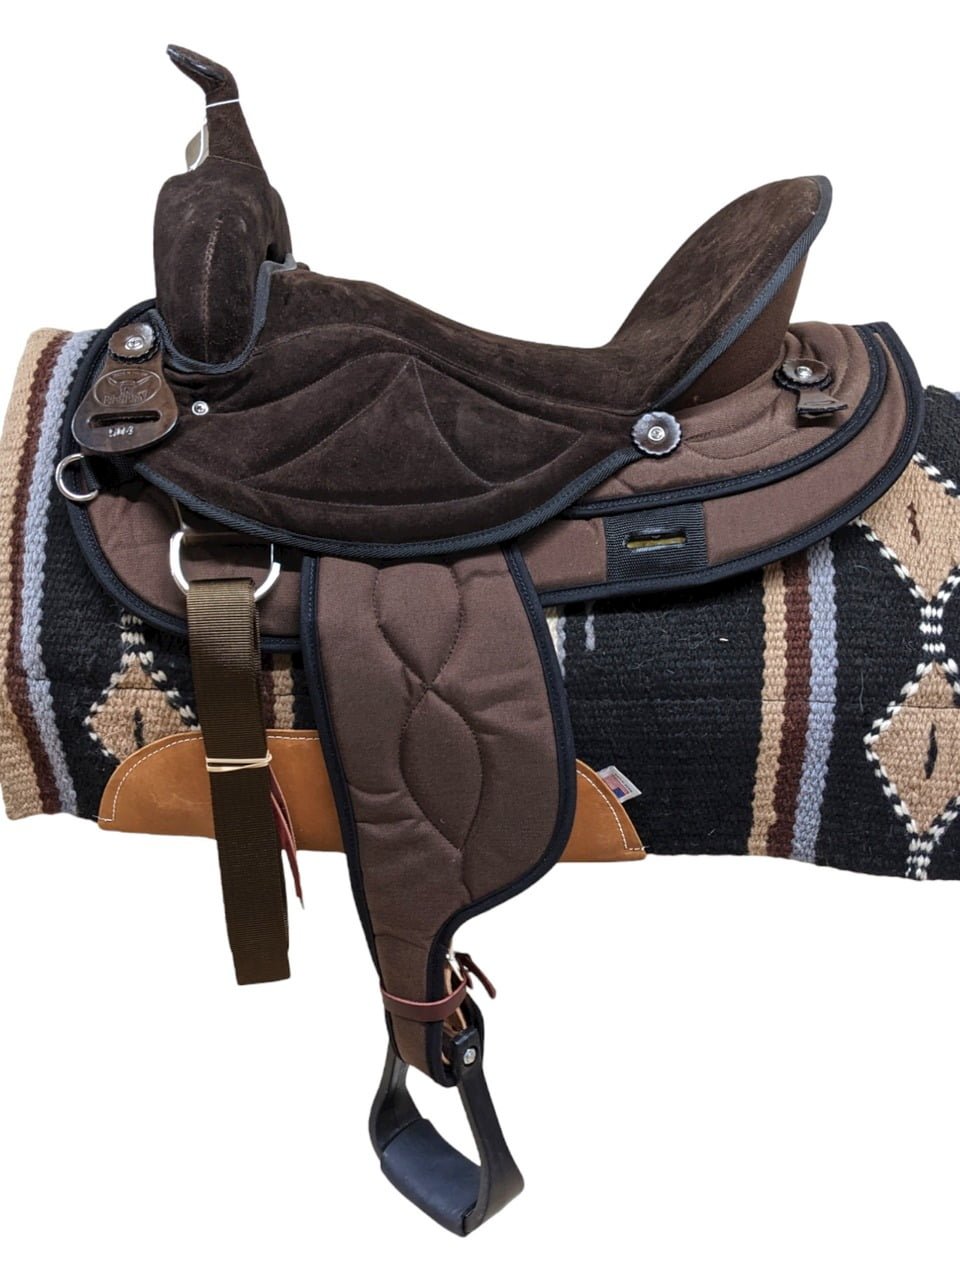 This exquisitely designed synthetic saddle showcases a rich, all-brown hue accented with black binding. The Big Horn synthetic model is characterized by a 5" cantle, and its seat is adorned with padded suede that extends seamlessly to the jockeys. Ensuring optimal tie functionality for your horse, a 7/8 position single front stainless steel dee is incorporated. Remarkably lightweight at 15 lbs, this saddle stands among the lightest options in the western saddle industry. The Ralide® material, coupled with laced suede cushioned foot pads, adds both durability and comfort to this exceptional piece.